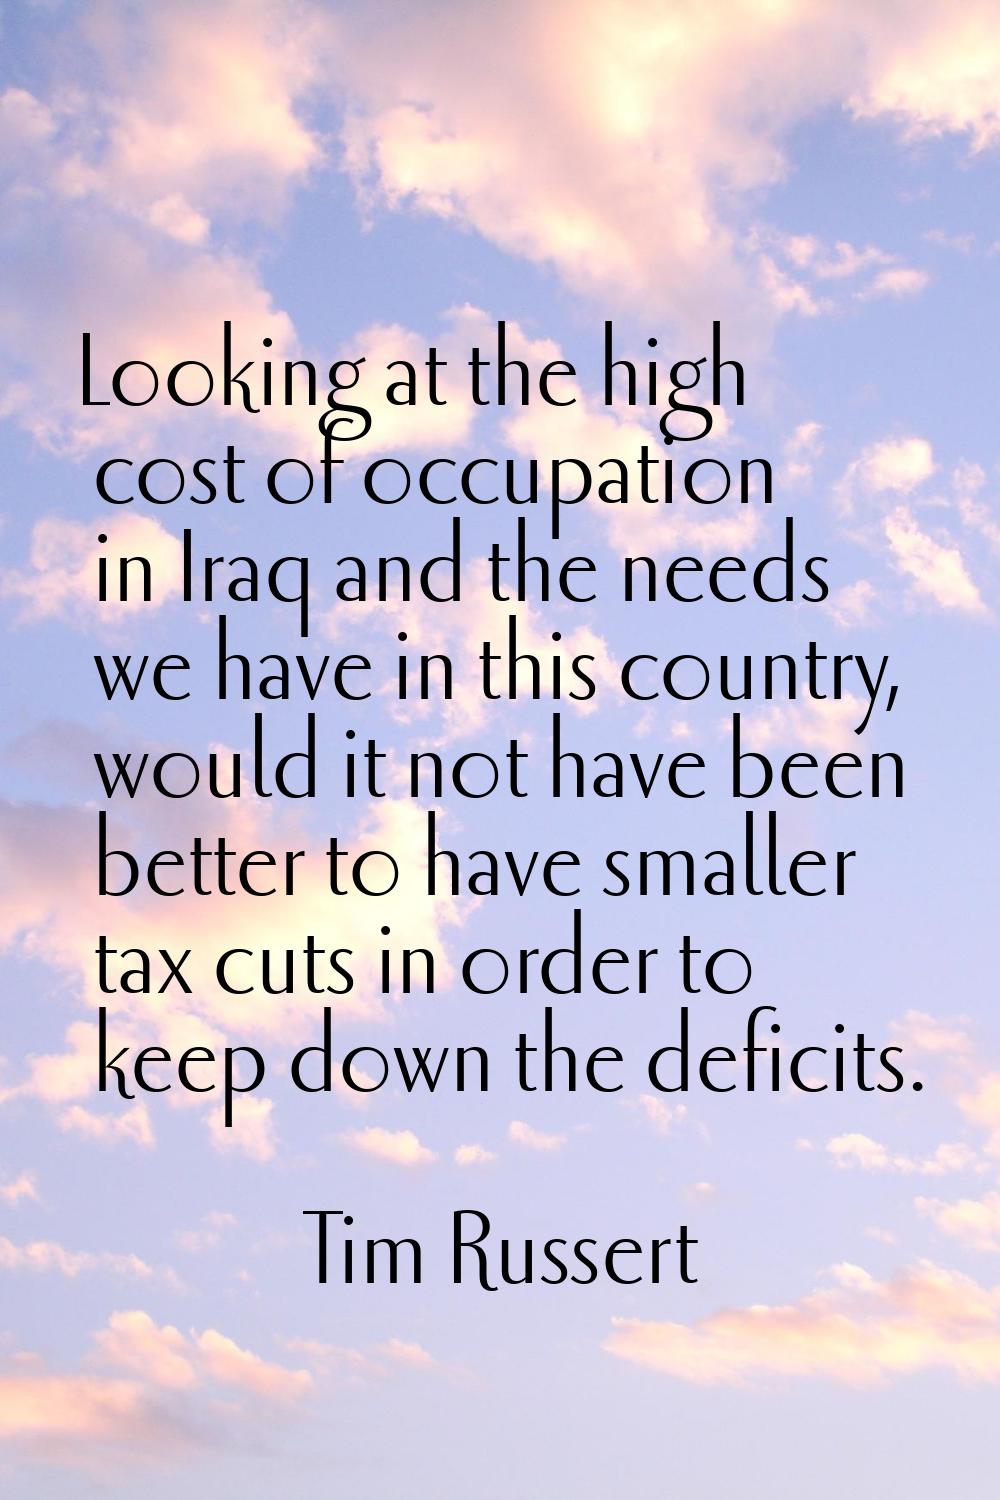 Looking at the high cost of occupation in Iraq and the needs we have in this country, would it not 